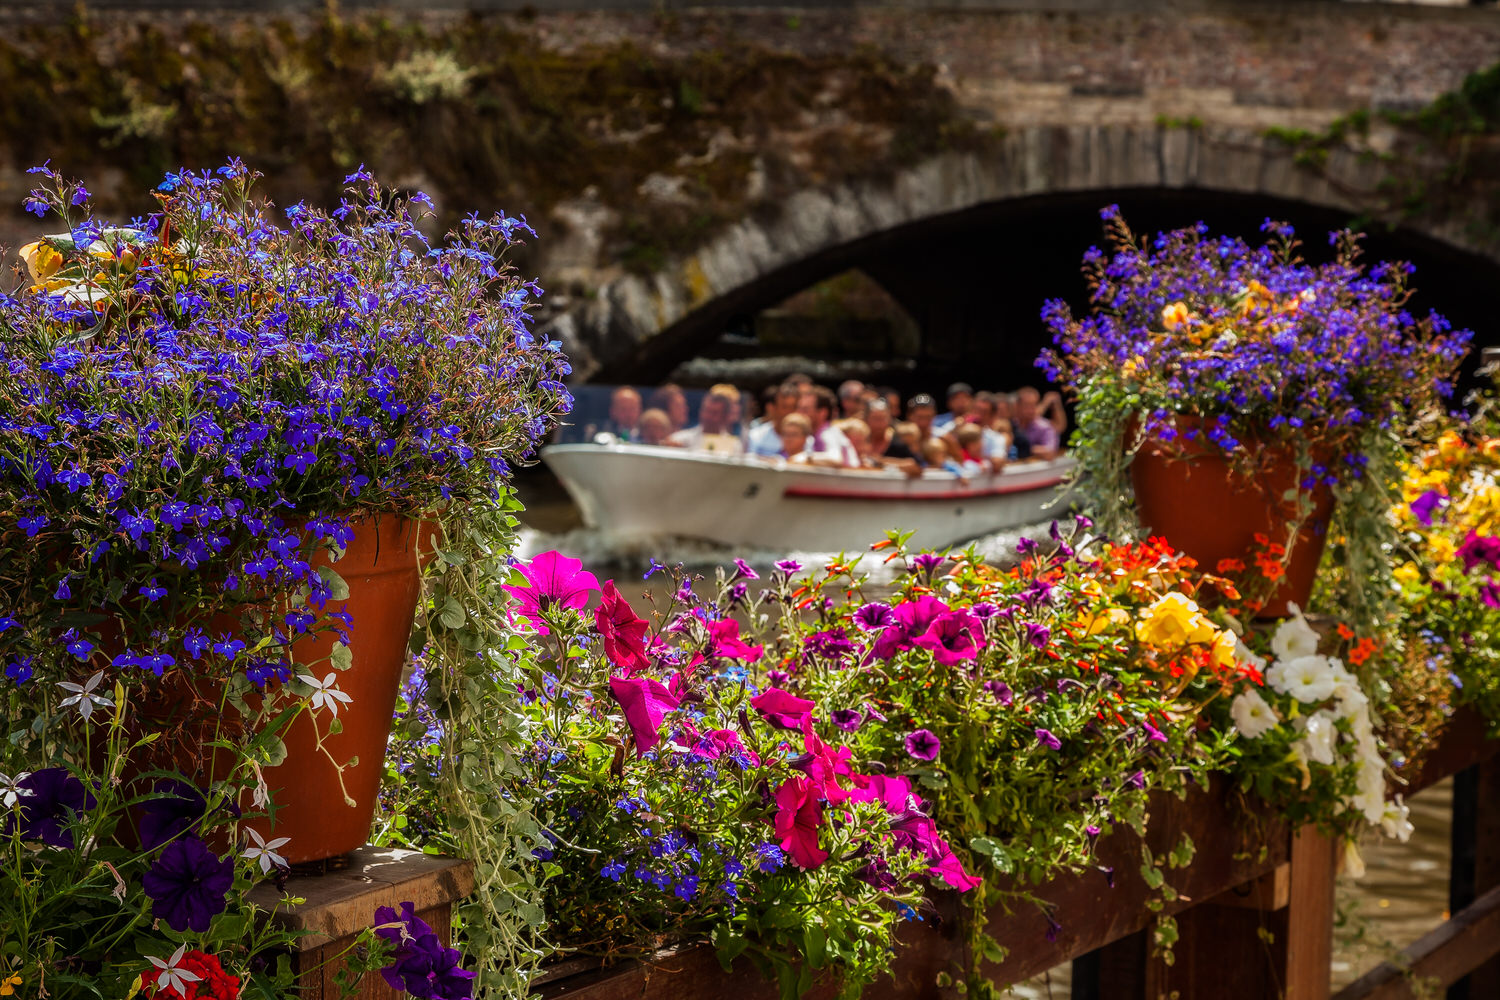 Colorful flowers await visitors touring the canals of Bruges on a beautiful summer's day in West Flanders, Belgium .